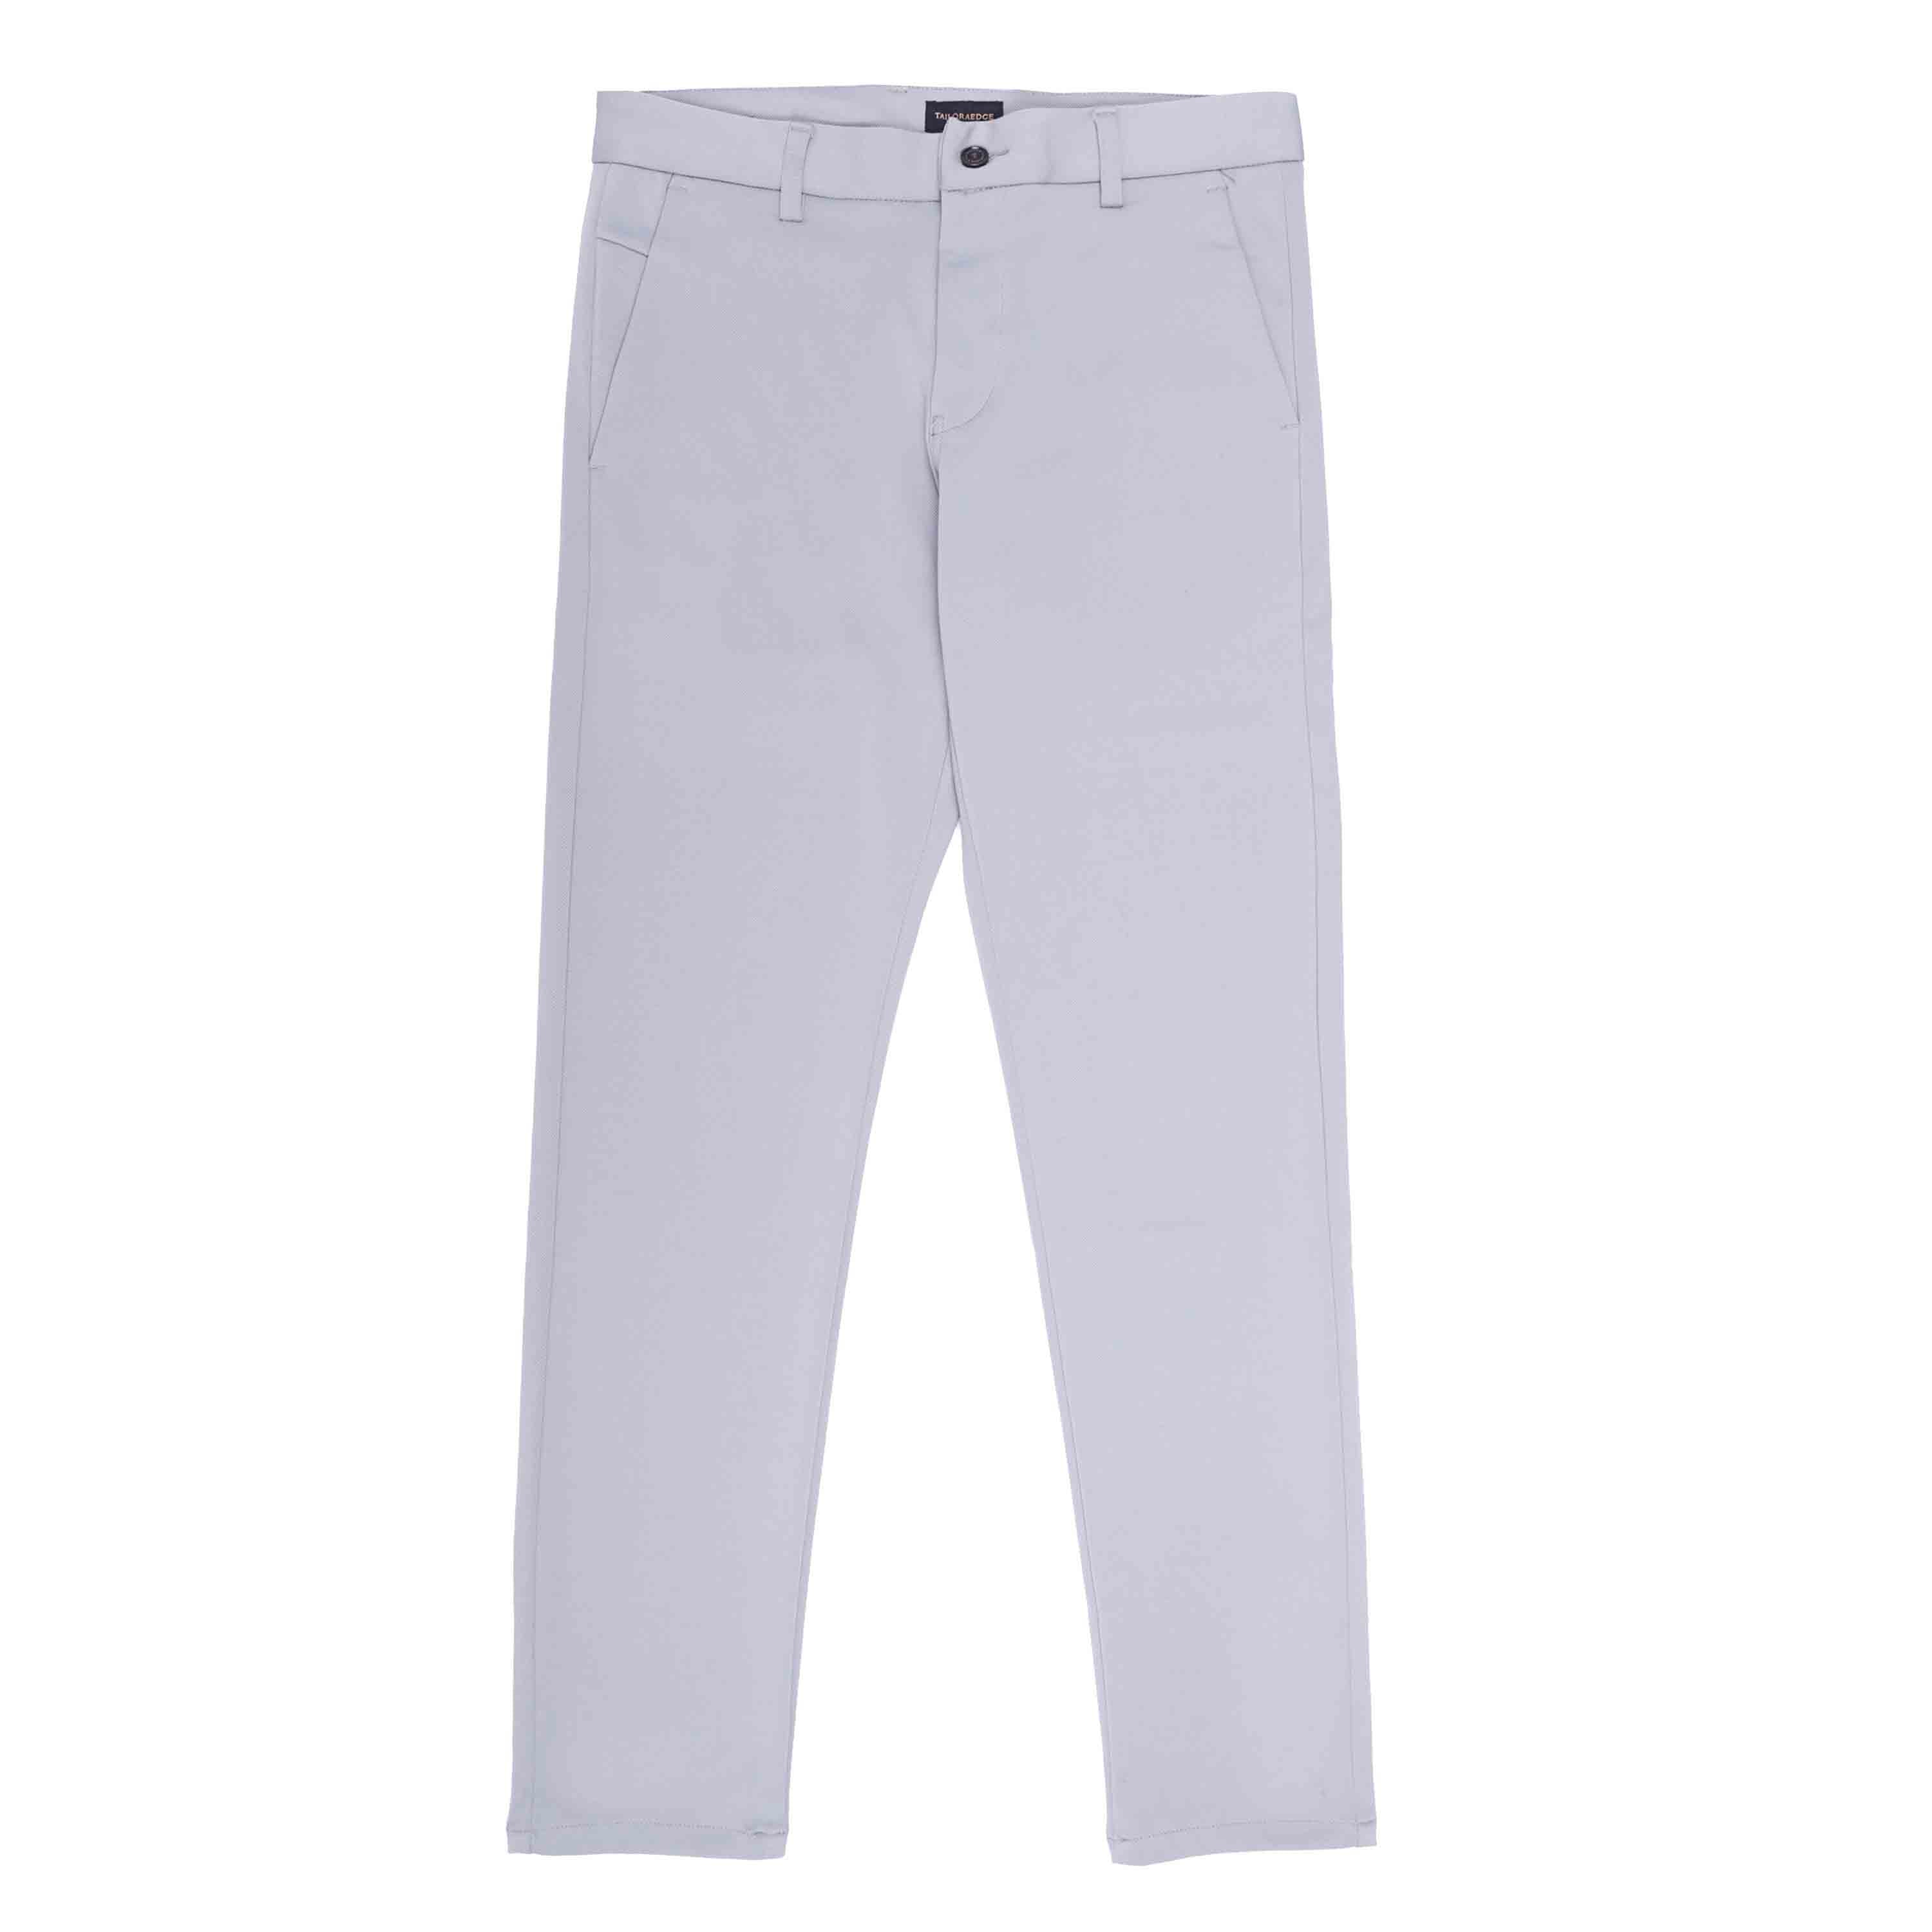 Buy Lazie Pants Online| Trending Pants for Women – Styched Fashion